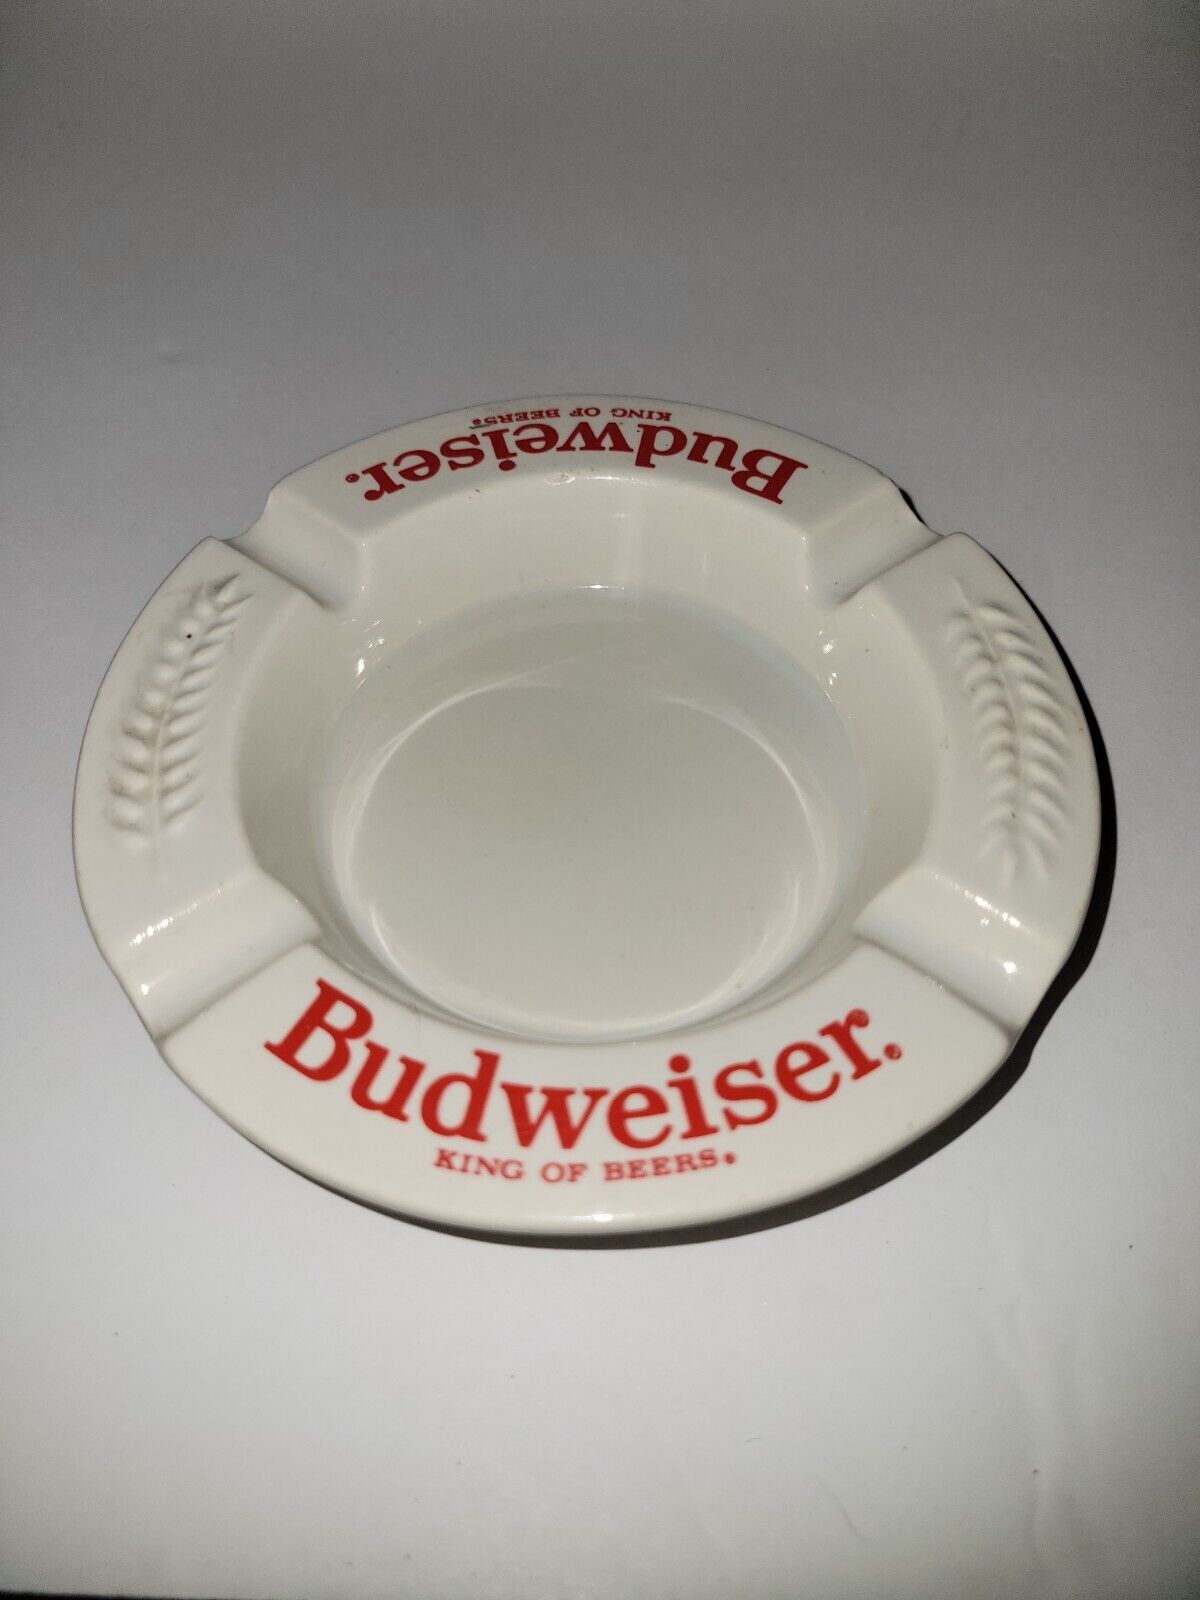 Budweiser King of Beers Ashtray Haeger Made in USA White Ceramic Busch Vintage